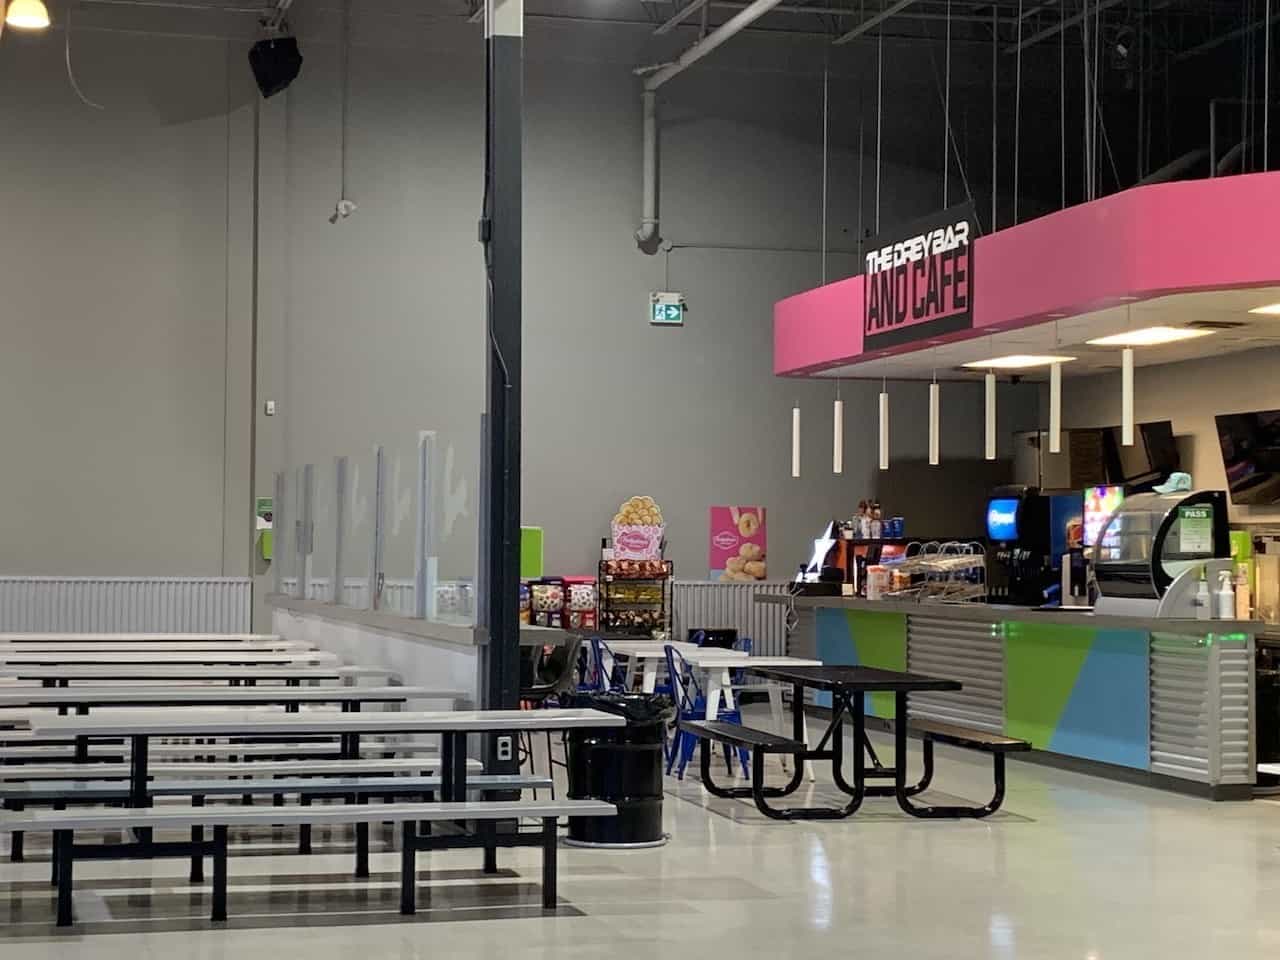 Drey Cafe and Party Area at The Flying Squirrel Trampoline Park - The Flying Squirrel Indoor Trampoline Park in Hamilton, Ontario has a large party area where parties and various events are hosted. The Drey Cafe offers a variety of snacks, appetizers, pizzas, and drinks.